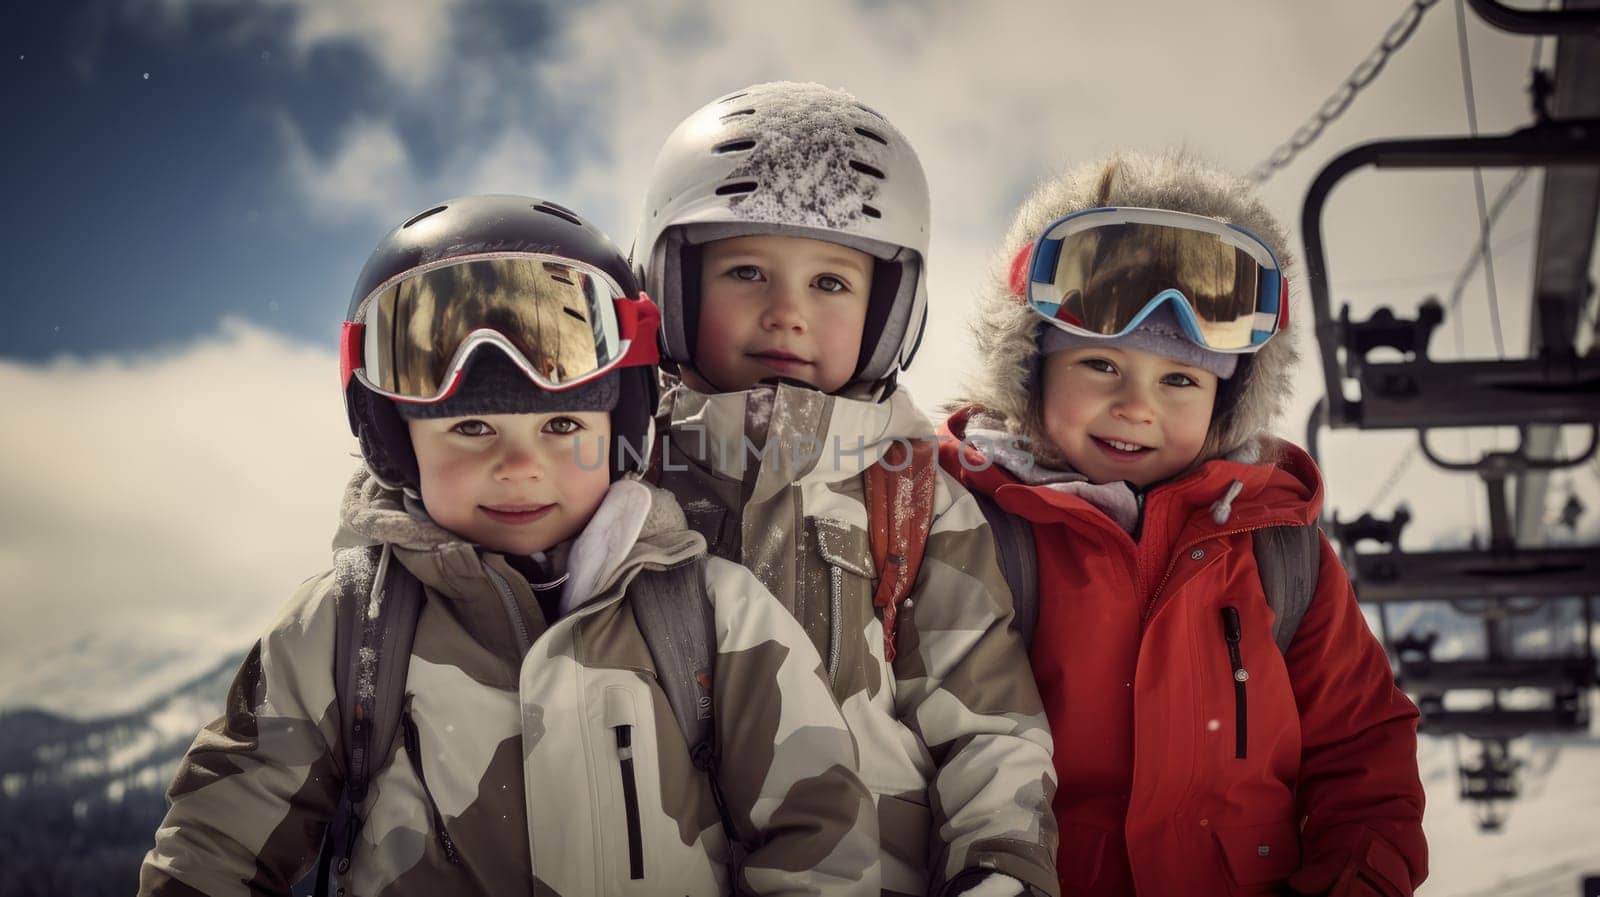 Happy children high in the snowy mountains at a ski resort, doing extreme sports, during vacation and winter holidays. Concept of traveling around the world, recreation, winter sports, vacations, tourism in the mountains and unusual places.